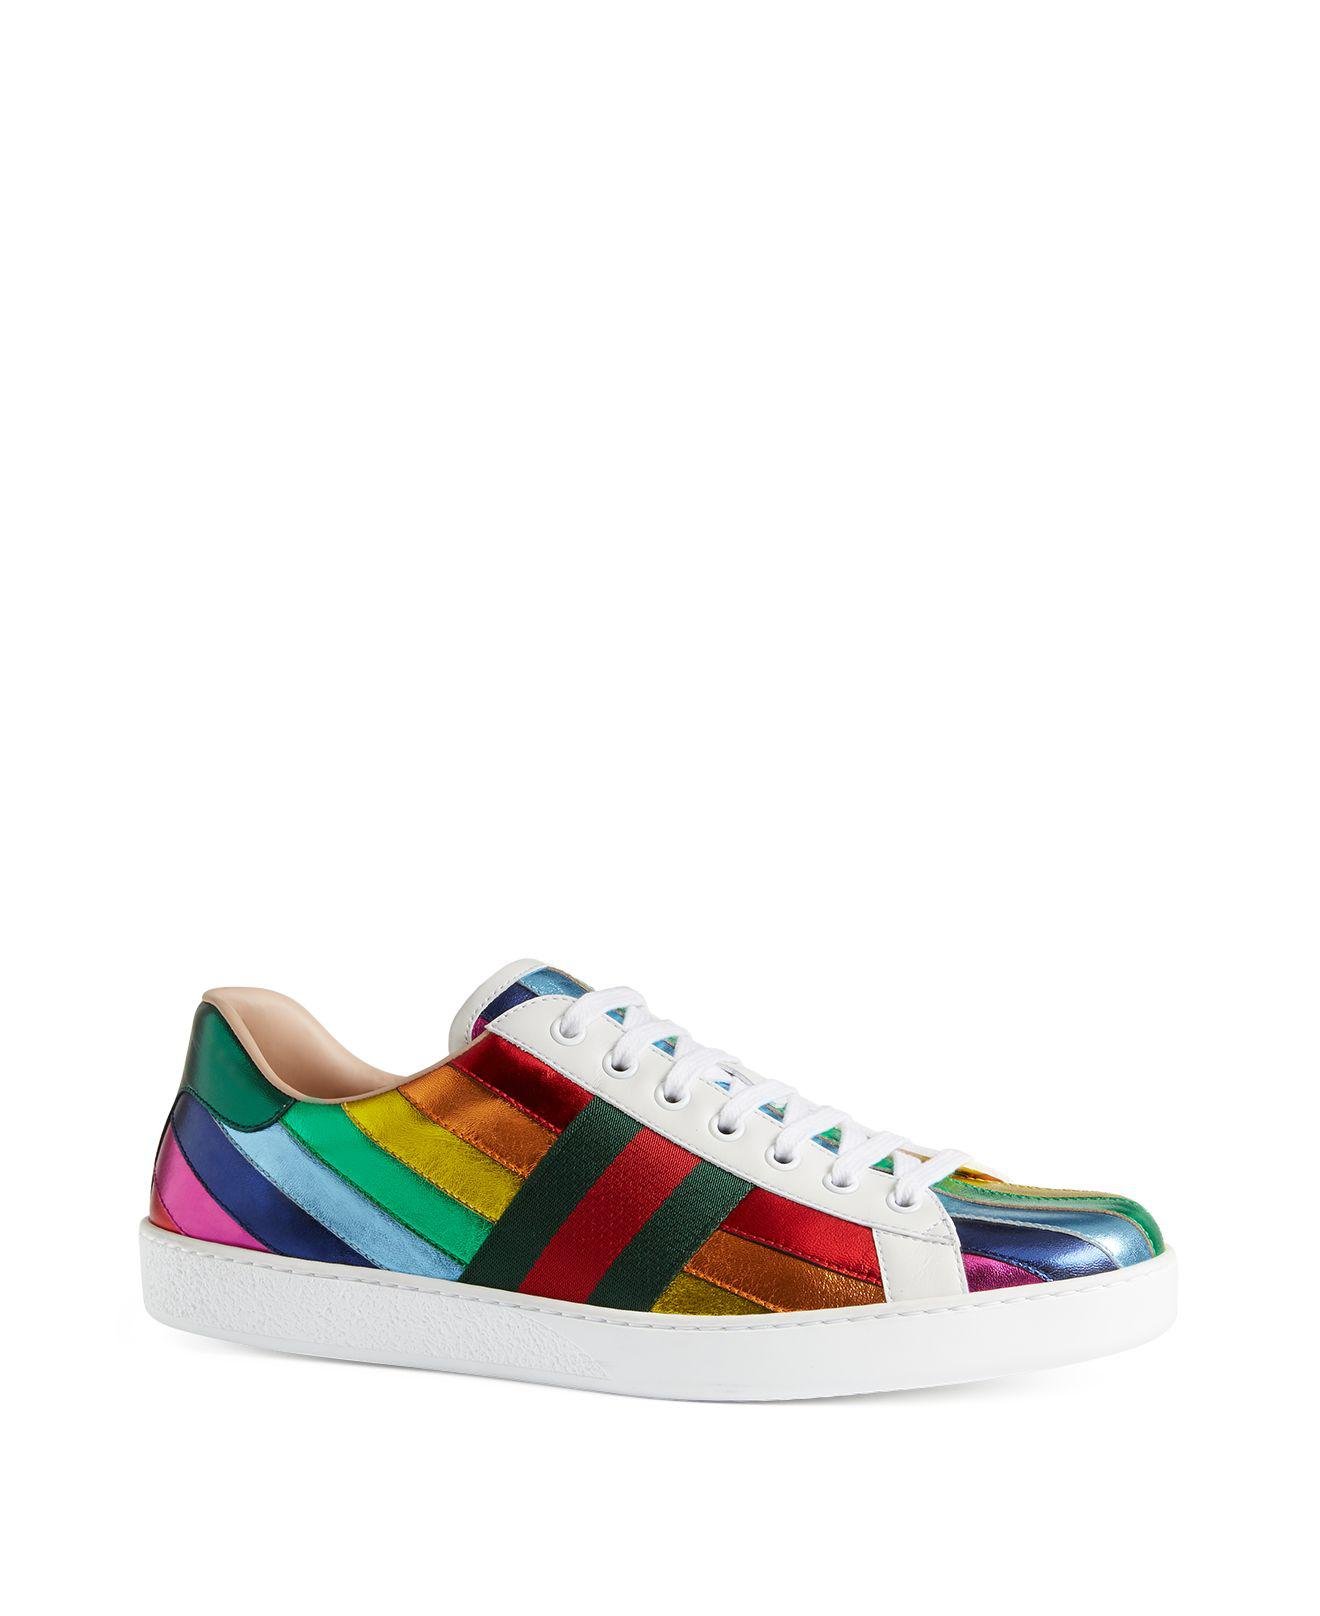 rainbow gucci sneakers